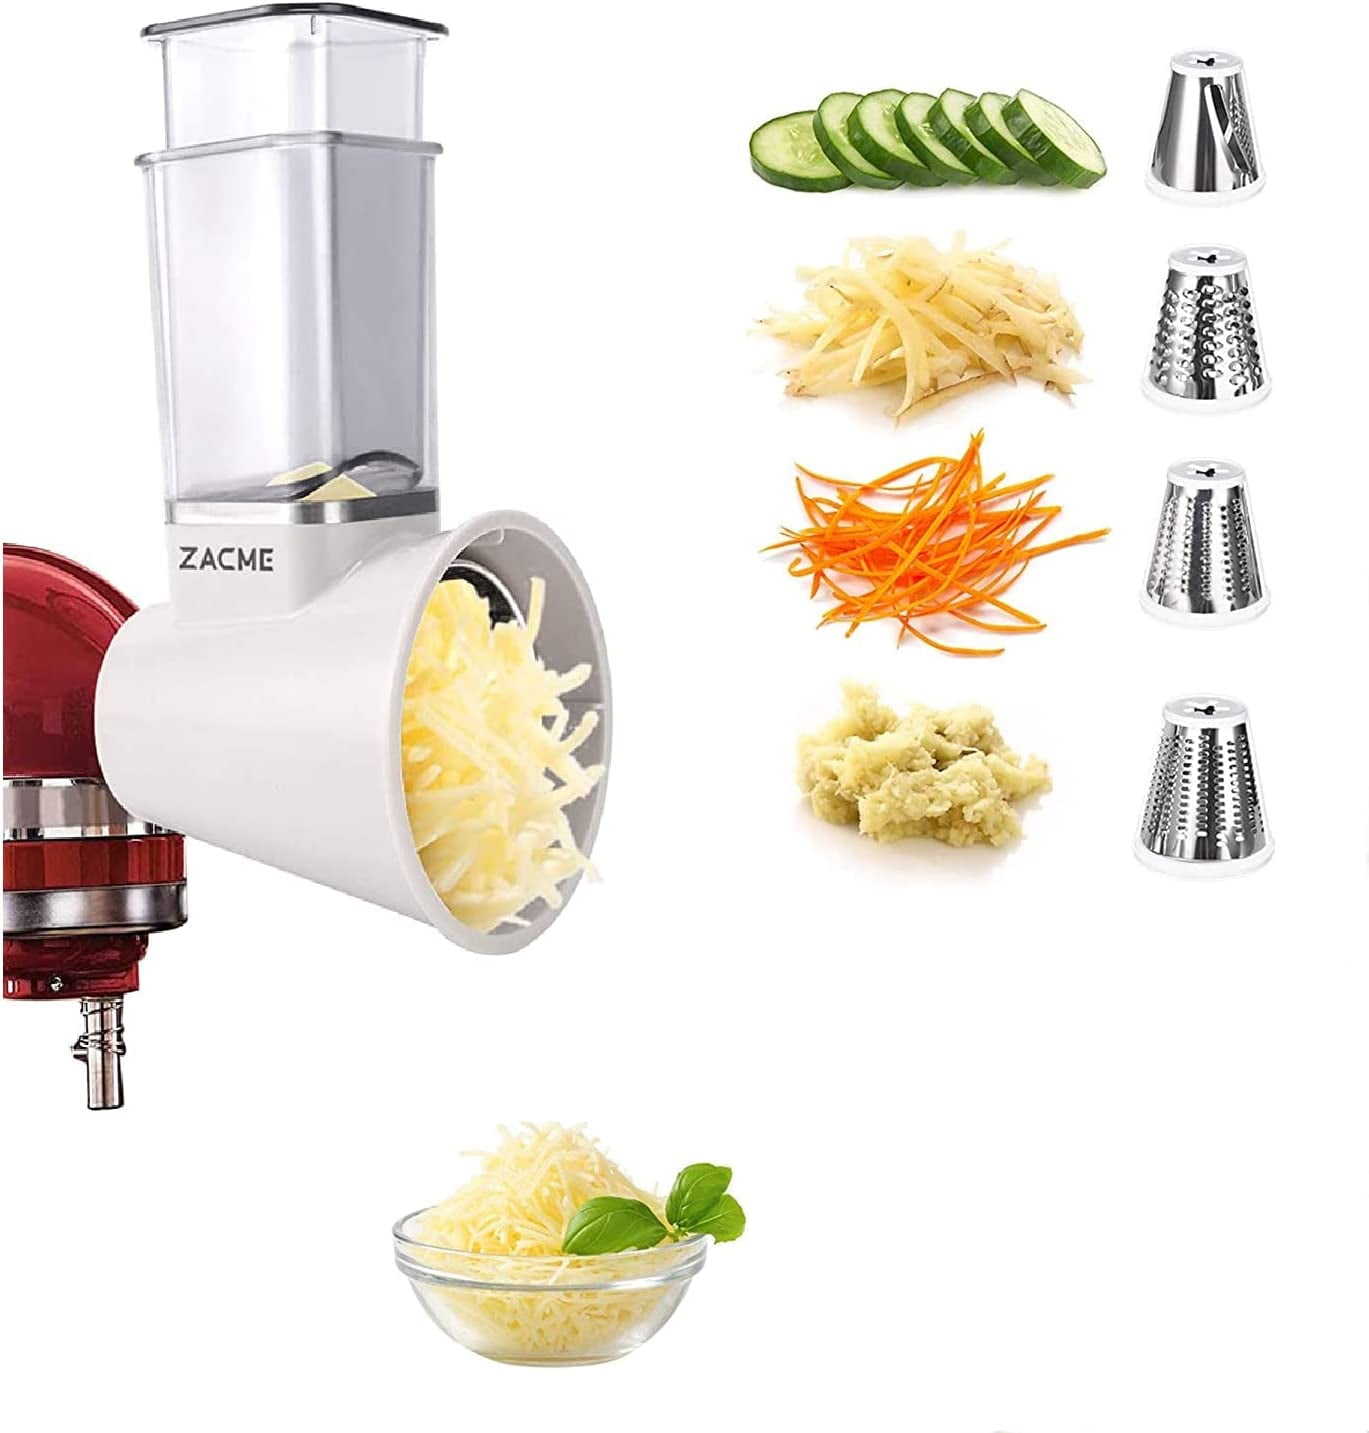 Kenome Slicer Shredder Attachments for KitchenAid Stand Mixers, Food Slicers  Cheese Grater Attachments, Salad Maker Accessory Vegetable Chopper with 3  Blades 